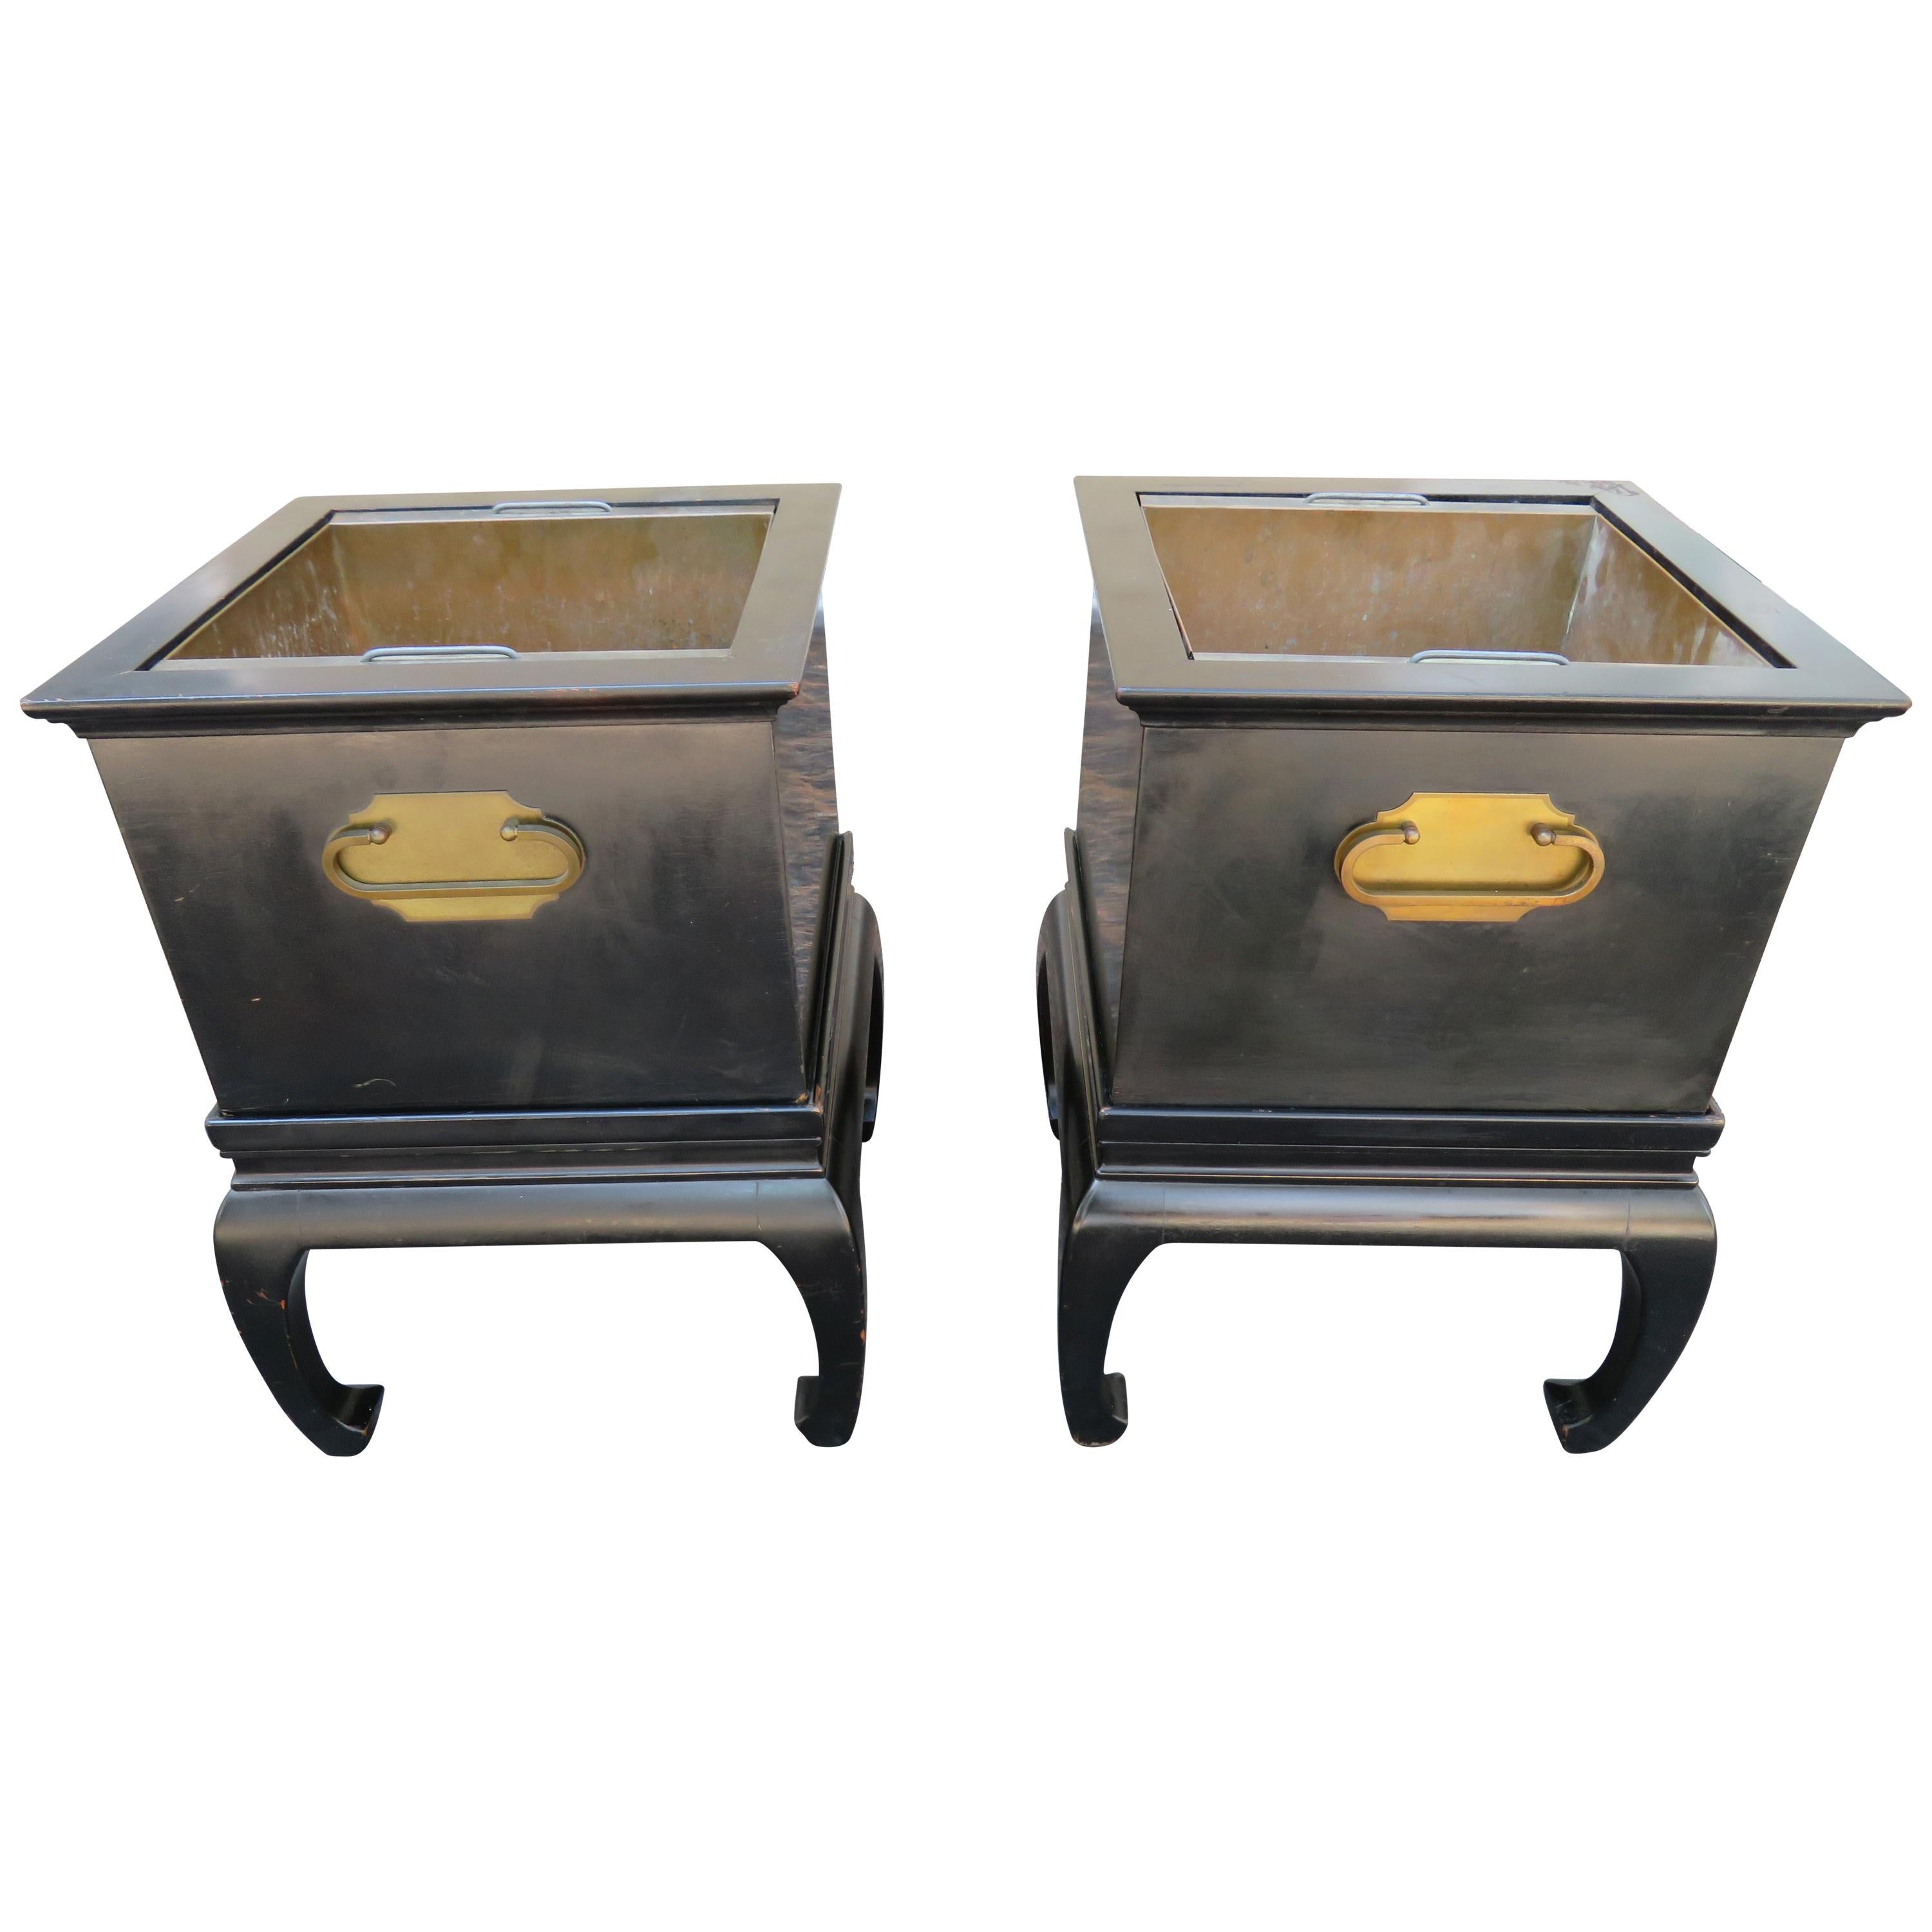 Wonderful Pair of Asian Modern Black Lacquered Planter Copper Inserts For Sale